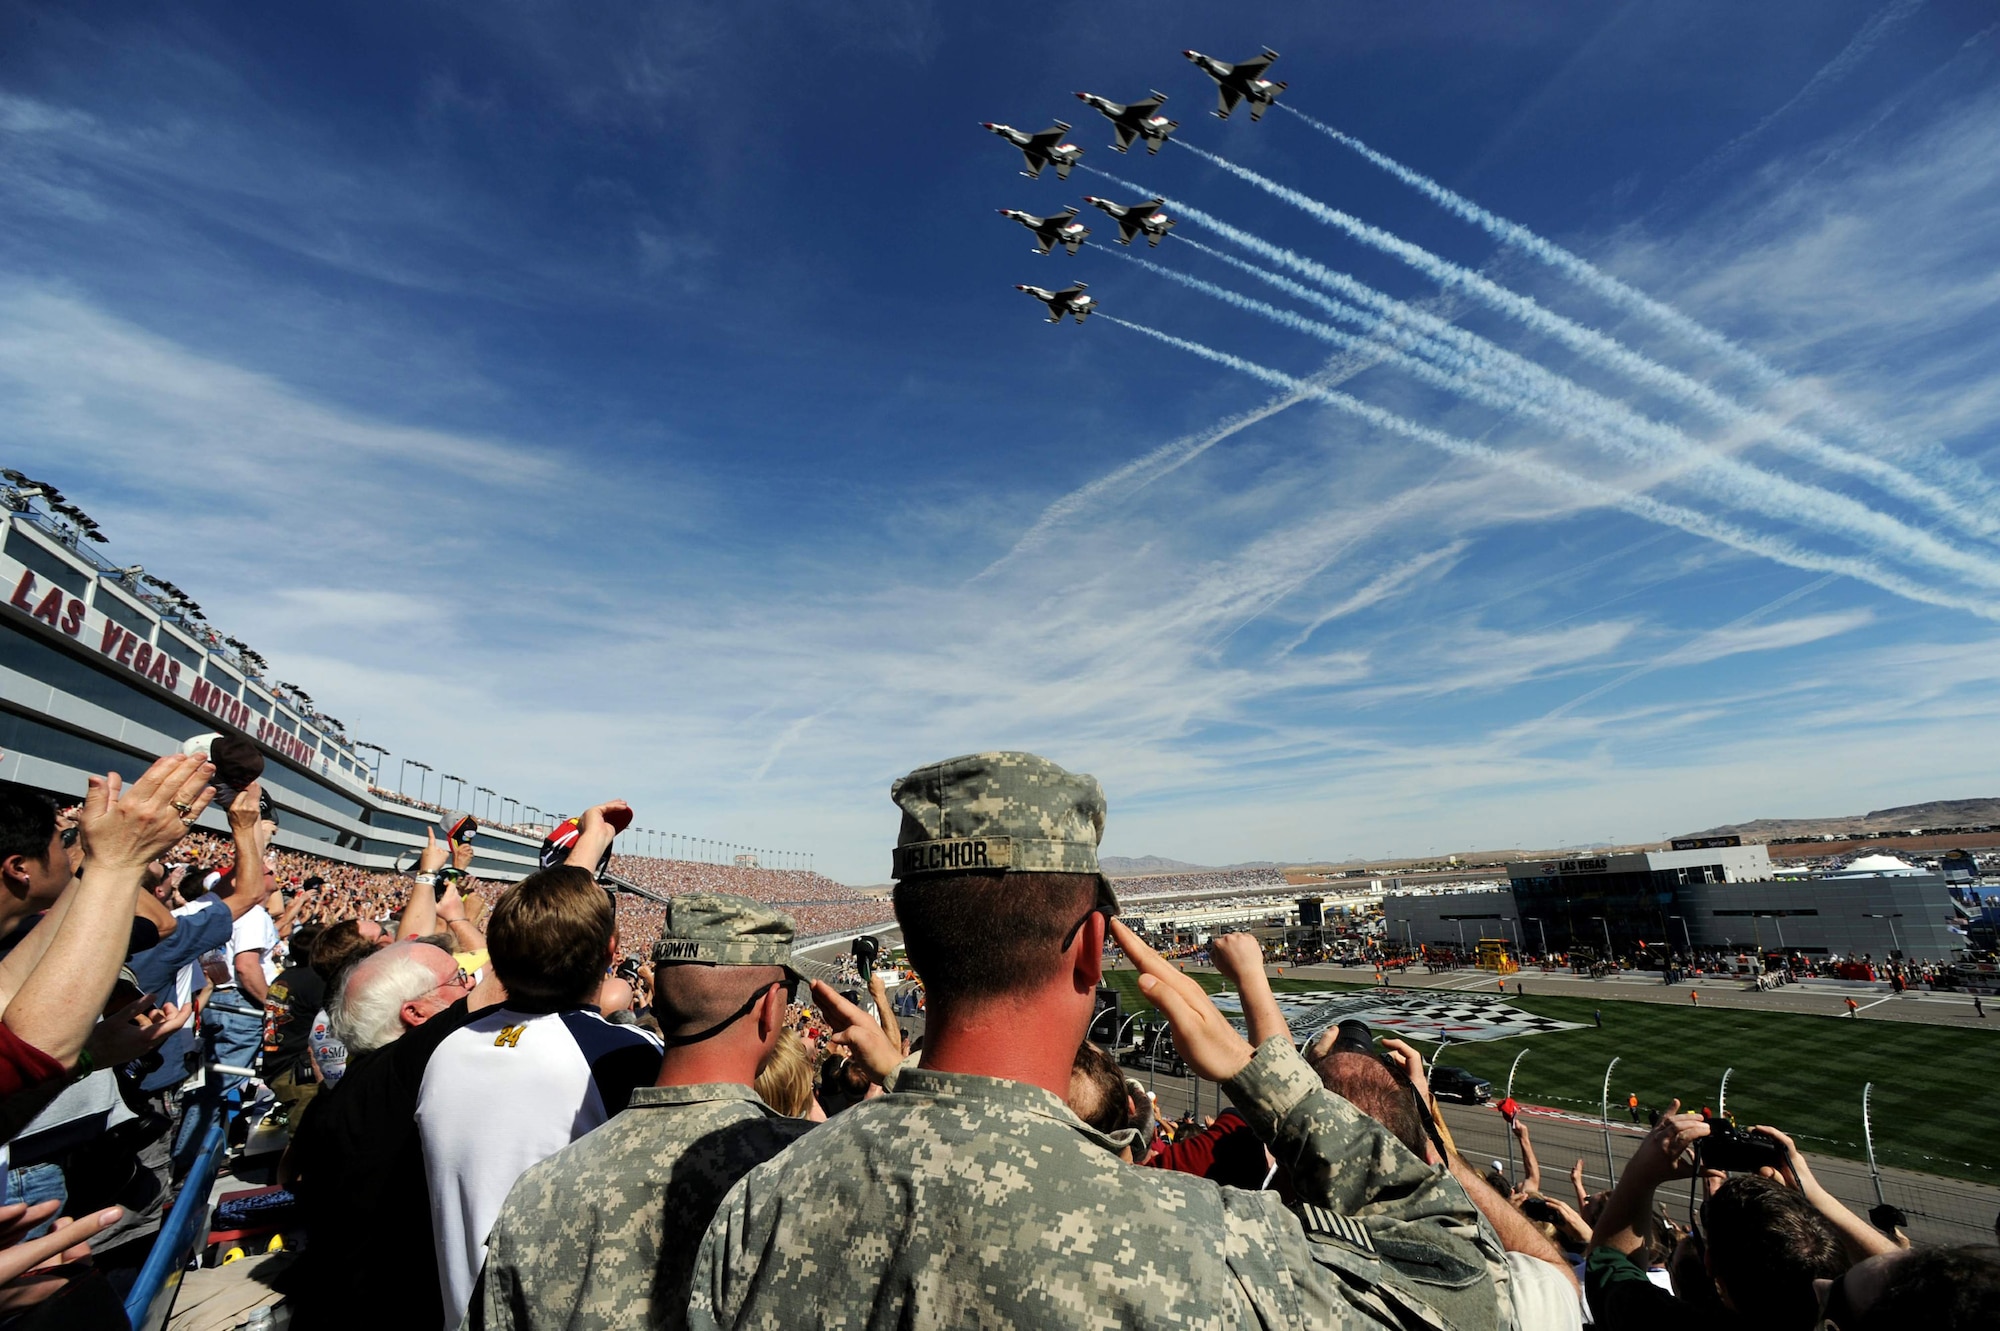 The U.S. Air Force Air Demonstration Squadron "Thunderbirds" fly over the Las Vegas Motor Speedway during the Shelby 427 NASCAR Sprint Cup race March 1 in Las Vegas. (U.S. Air Force photo/Staff Sgt Kristi Machado)